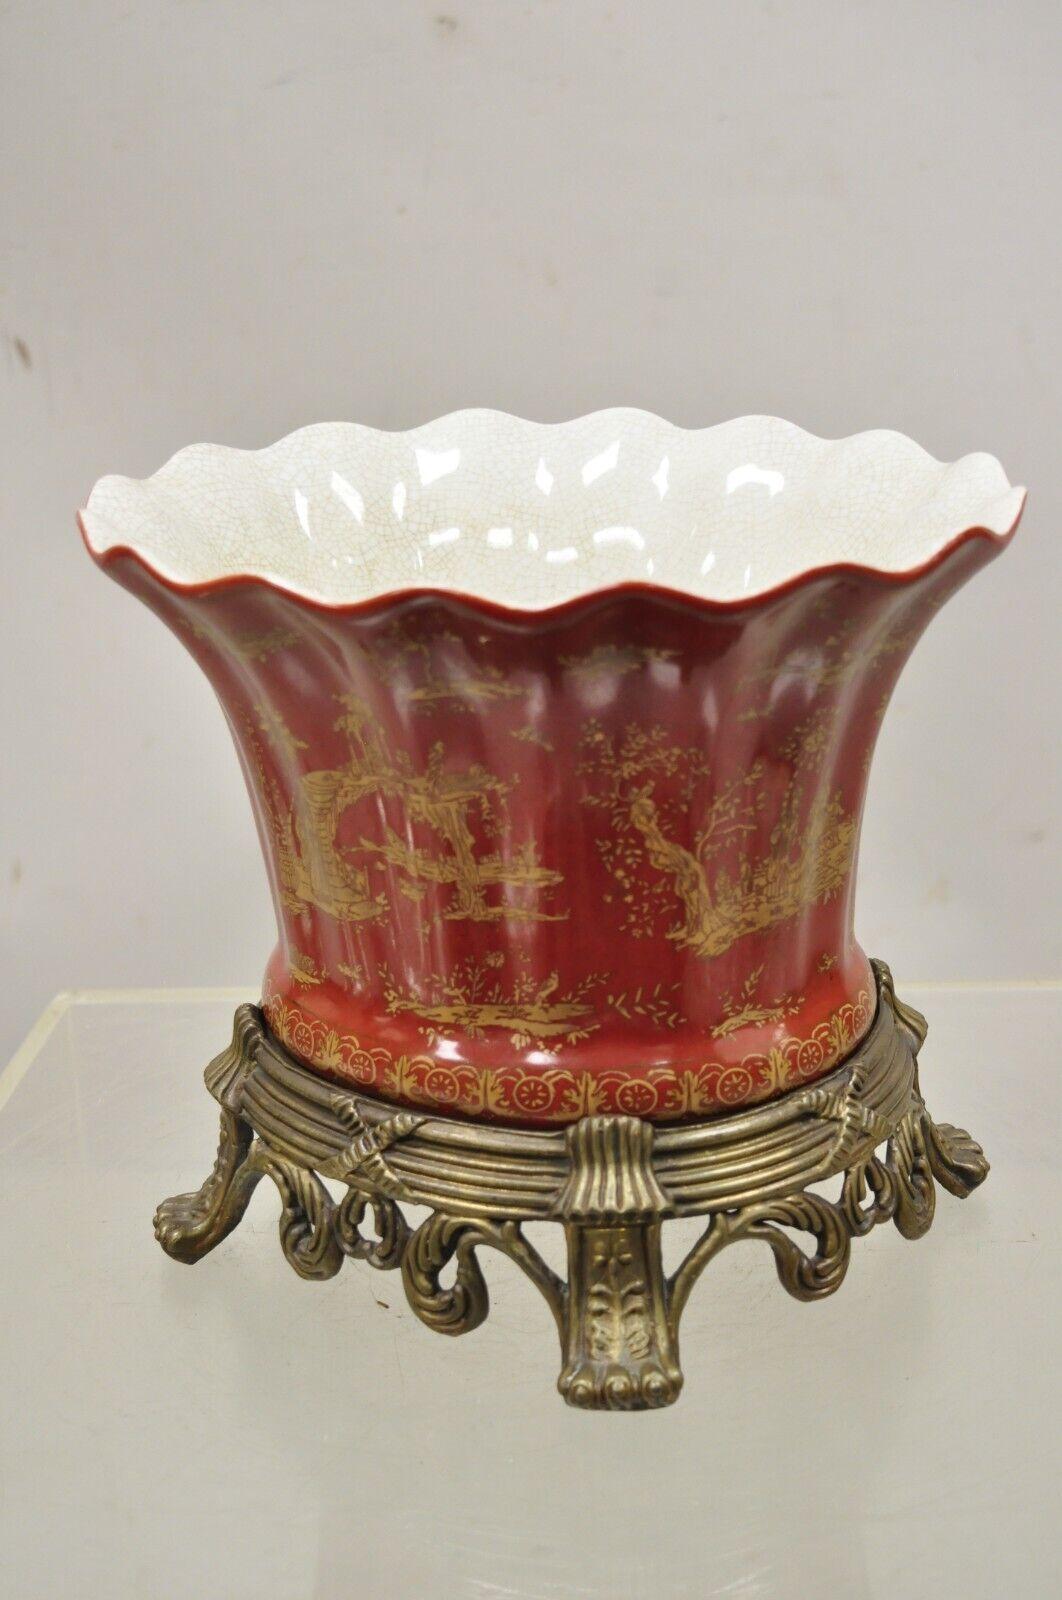 Chinoiserie style red ceramic scalloped planter pot on ornate bronze base. Item features figural chinoiserie design, ornate bronze base, very nice item, great style and form, circa Late 20th - Early 21st. Measurements: 9